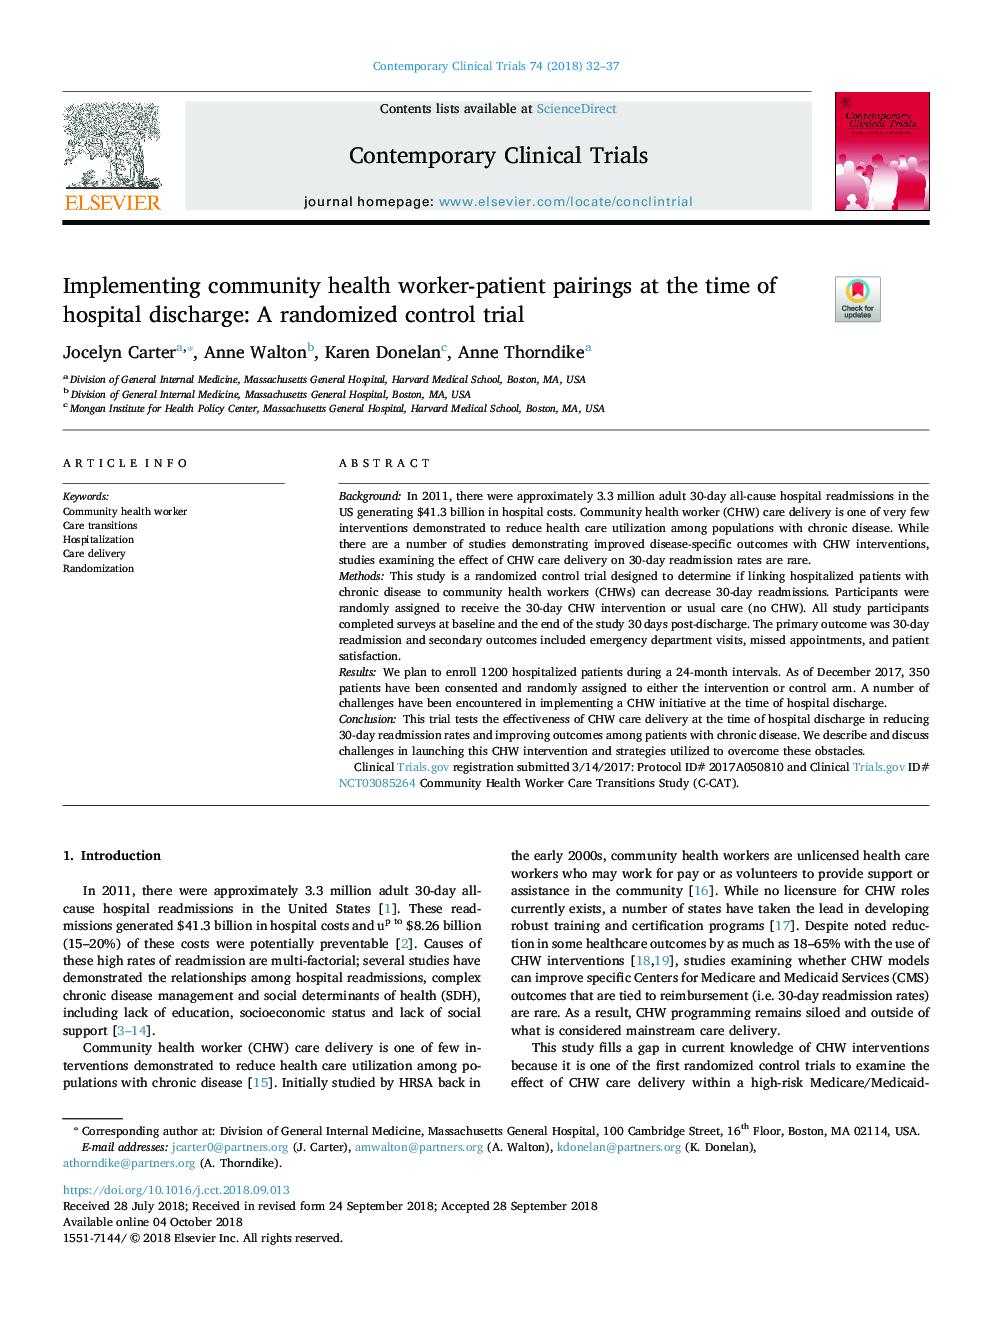 Implementing community health worker-patient pairings at the time of hospital discharge: A randomized control trial